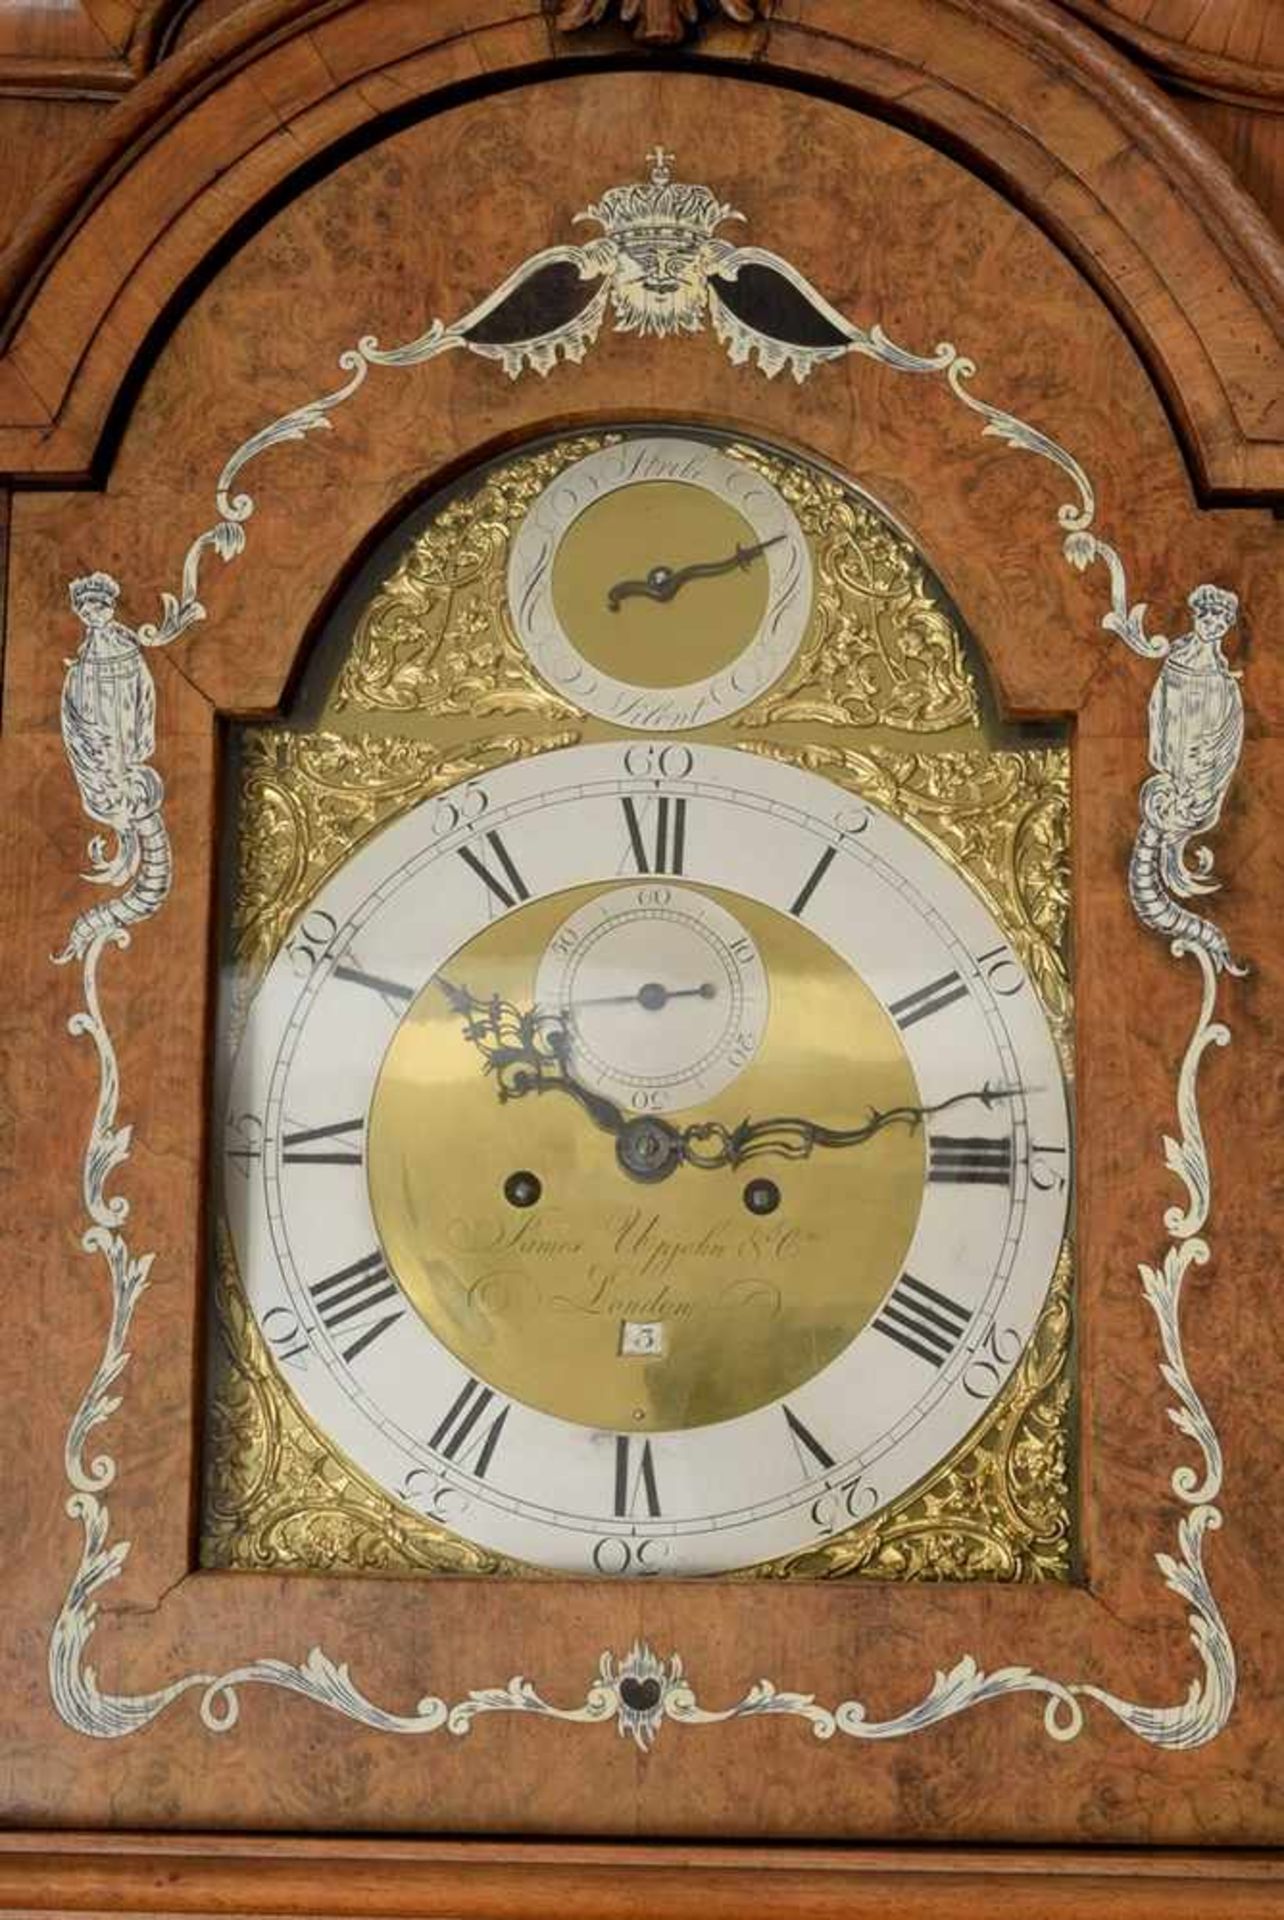 Large rococo grandfather clock with figural ivory inlays and rocaille carvings, walnut veneer, 8-day - Image 2 of 17